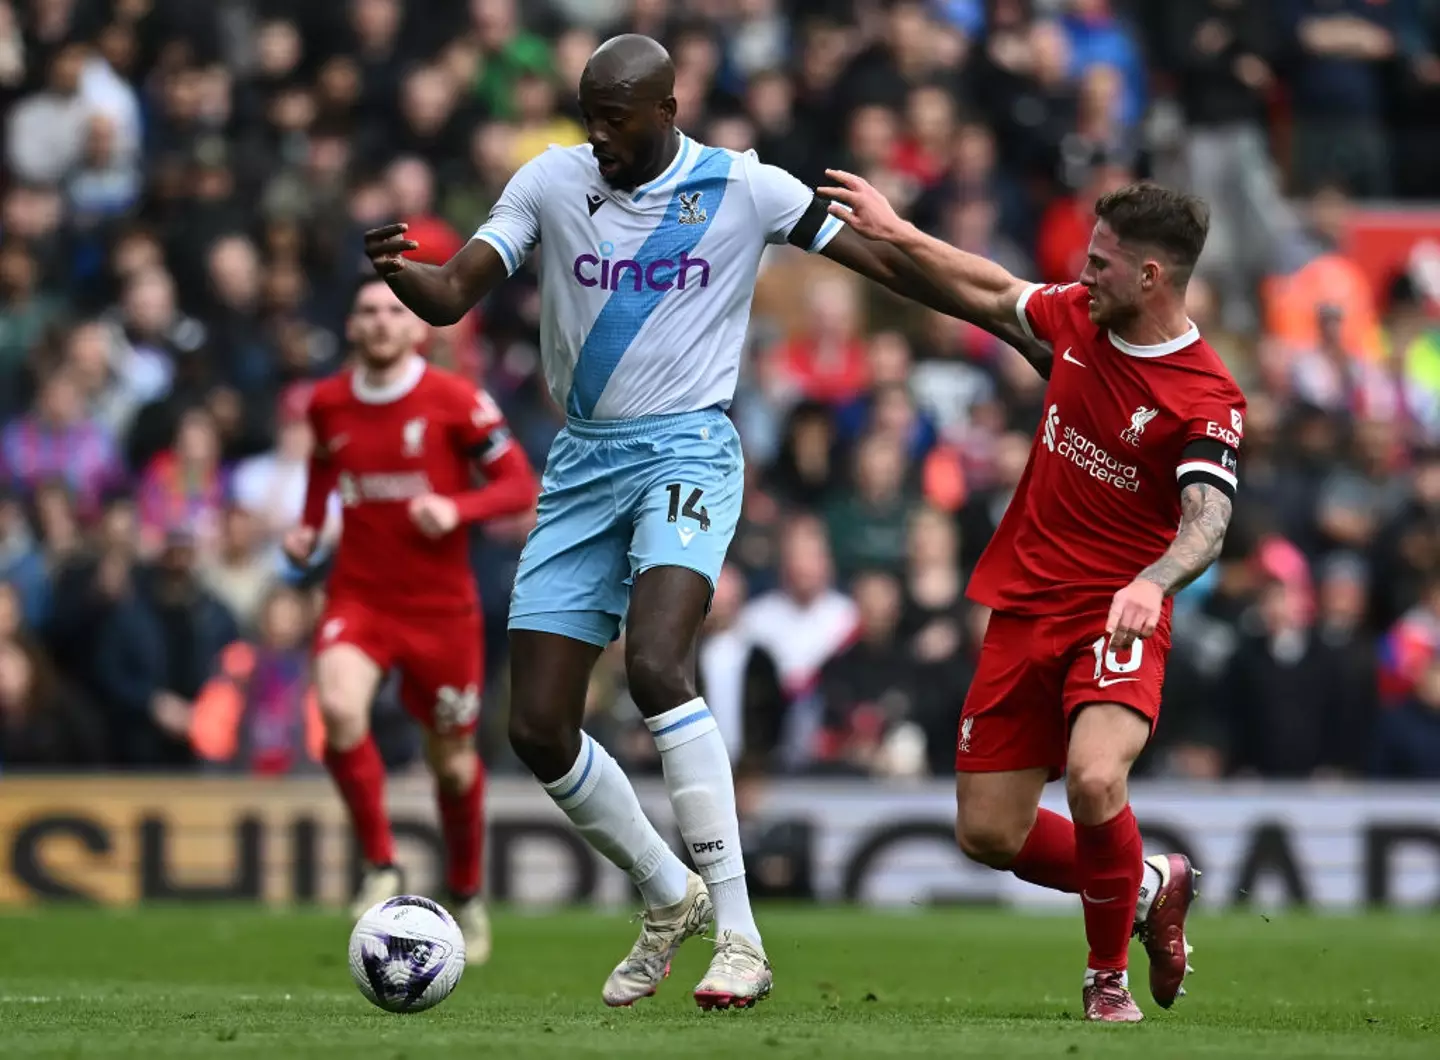 Liverpool struggled in the first half against Palace (Image: Getty)